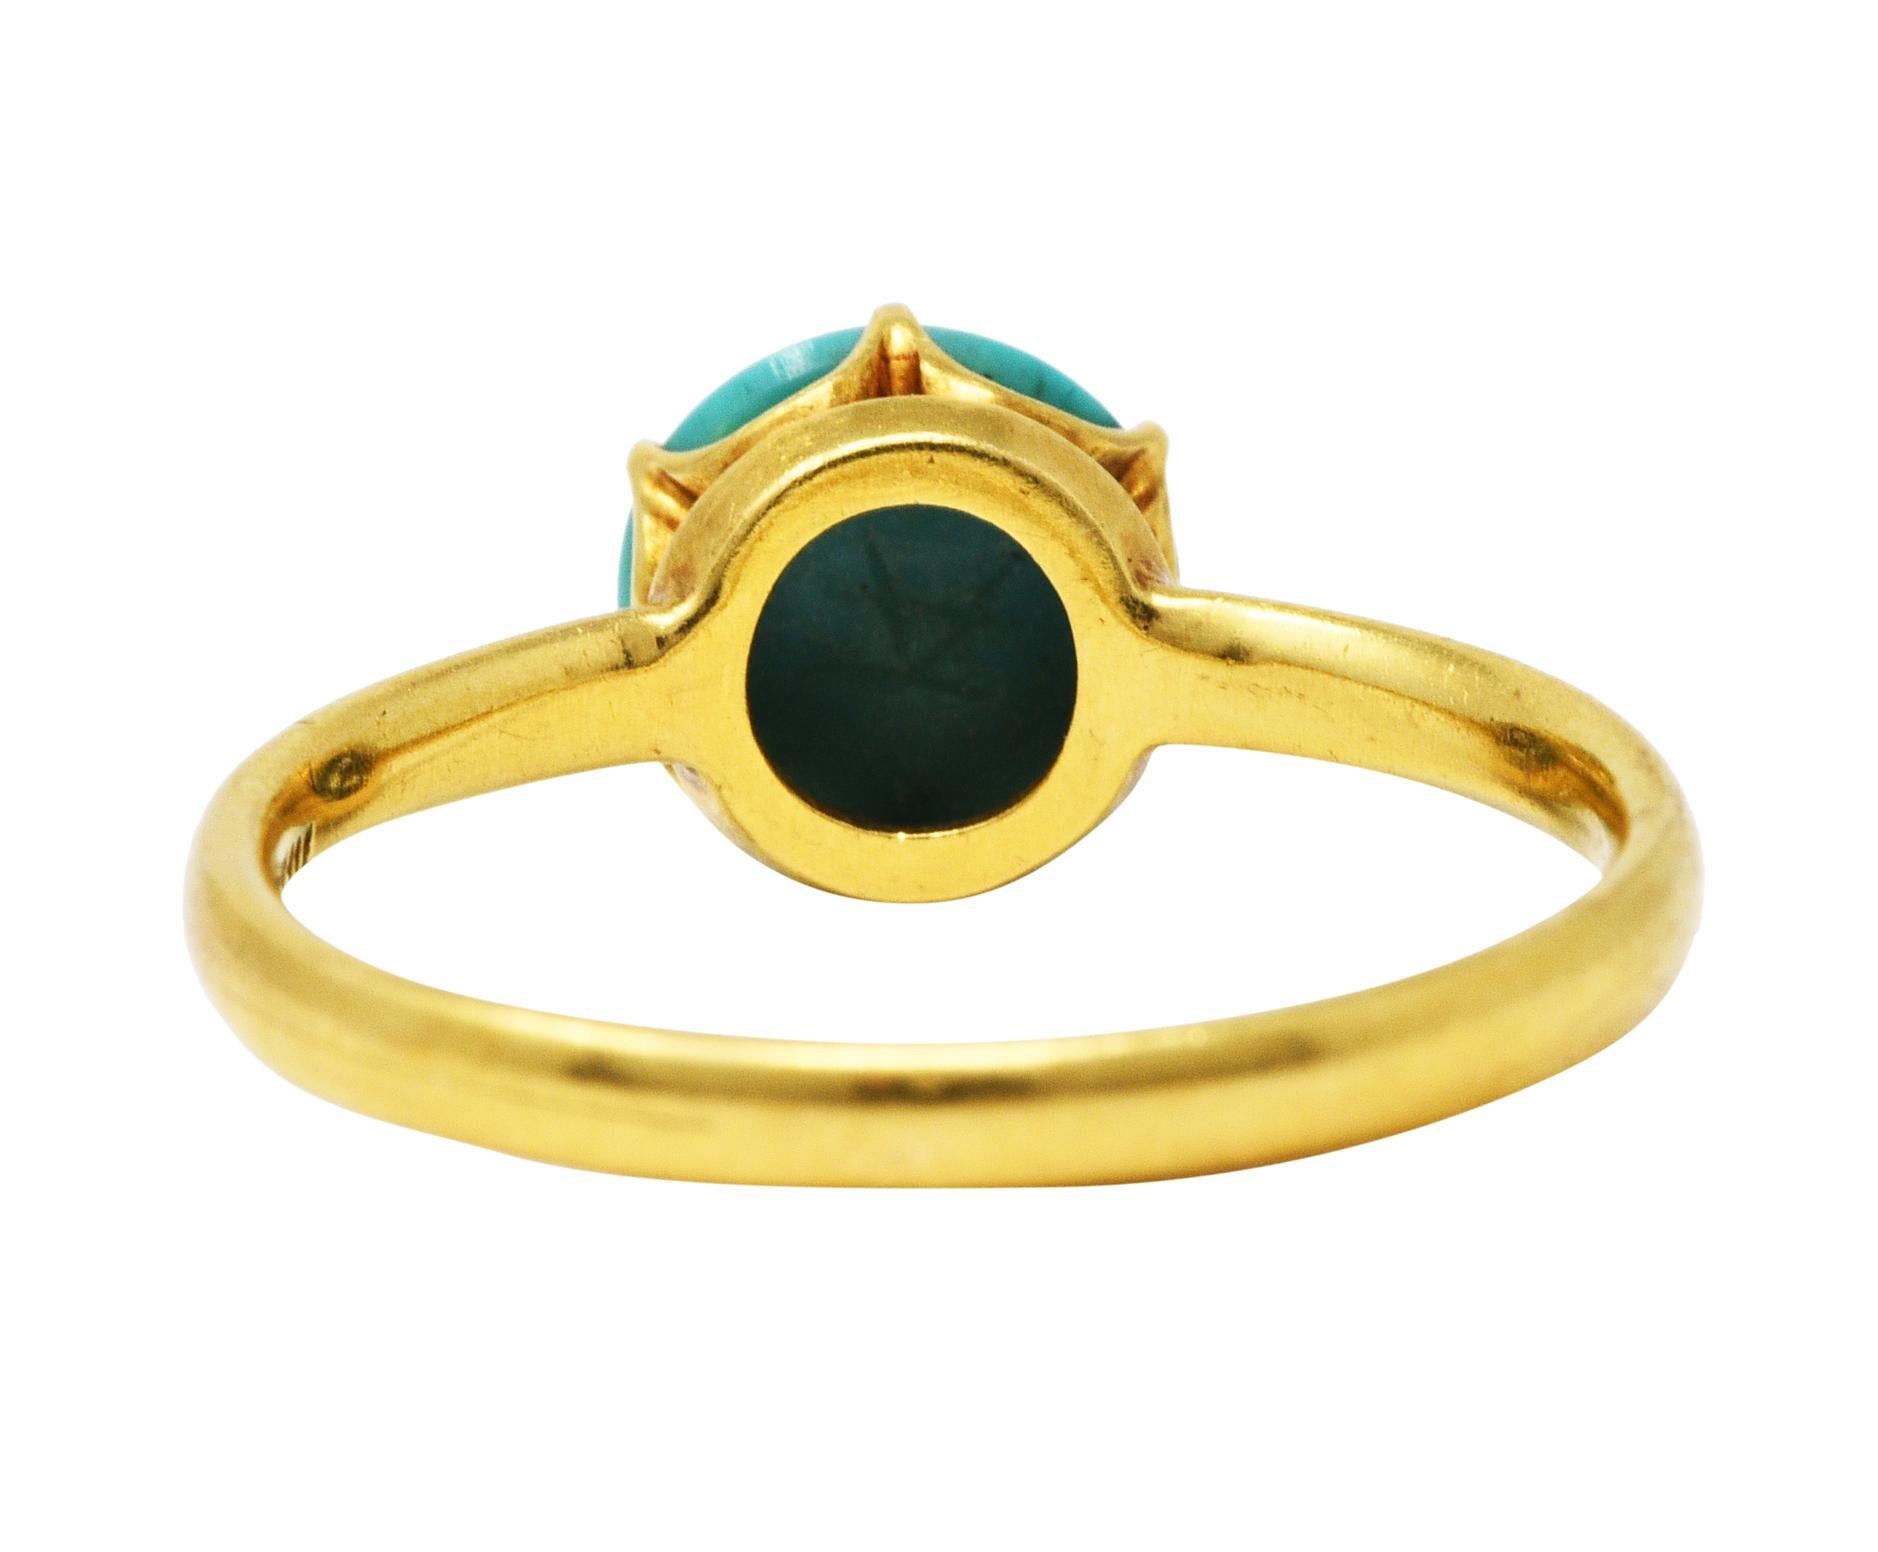 Cabochon 1960's Tiffany & Co. Turquoise 18 Karat Gold Solitaire Ring